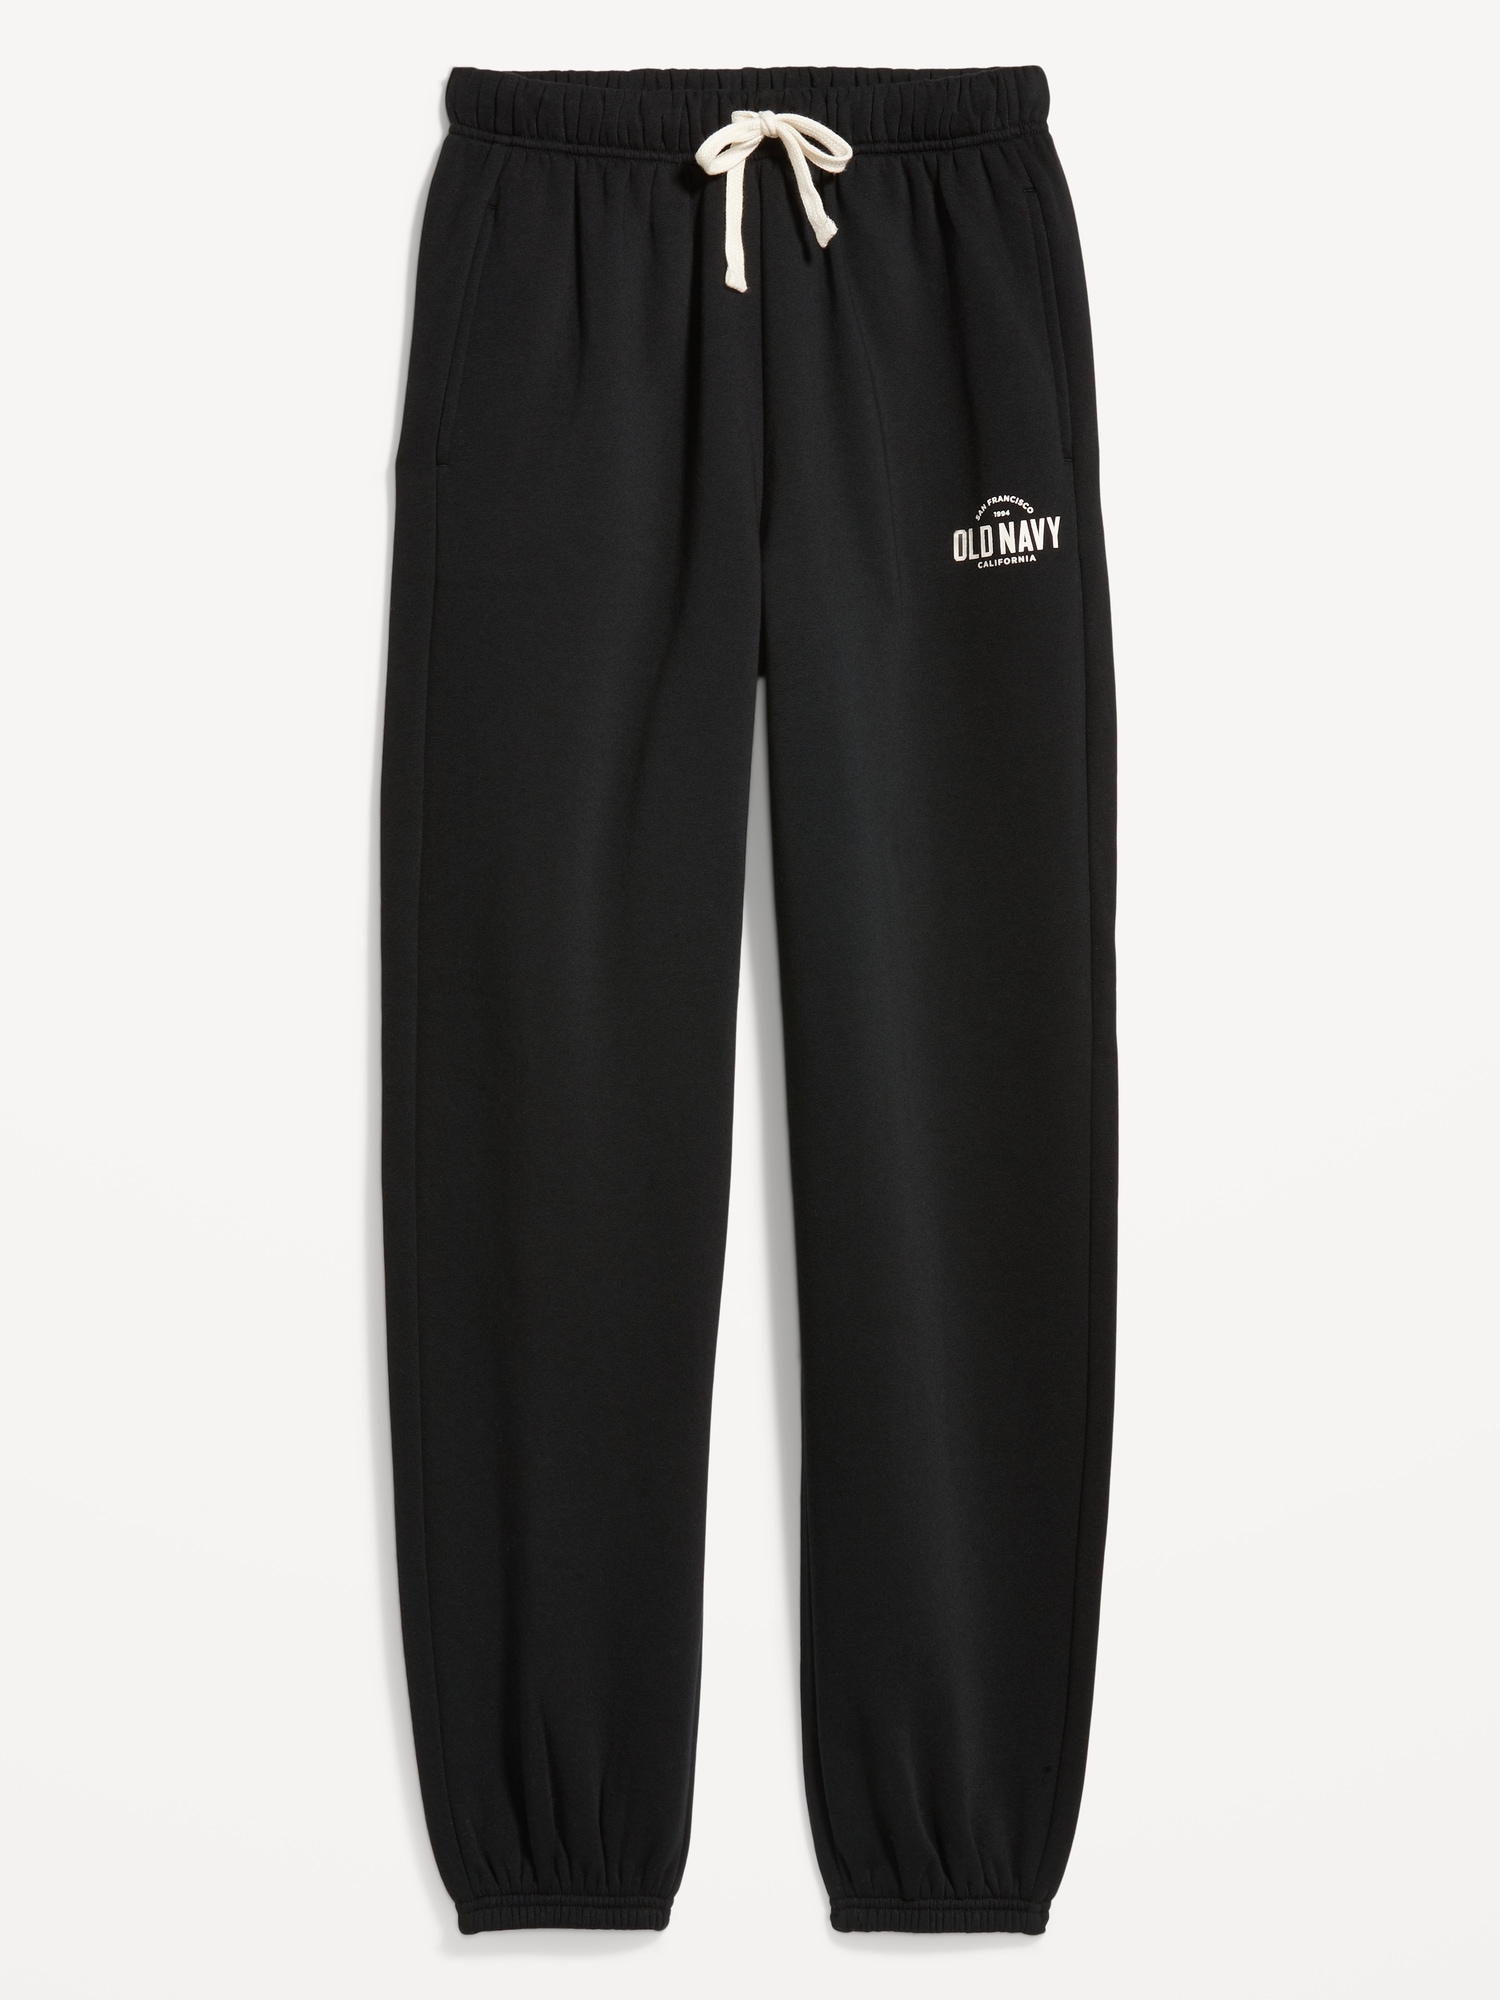 Extra High-Waisted Logo Sweatpants | Old Navy